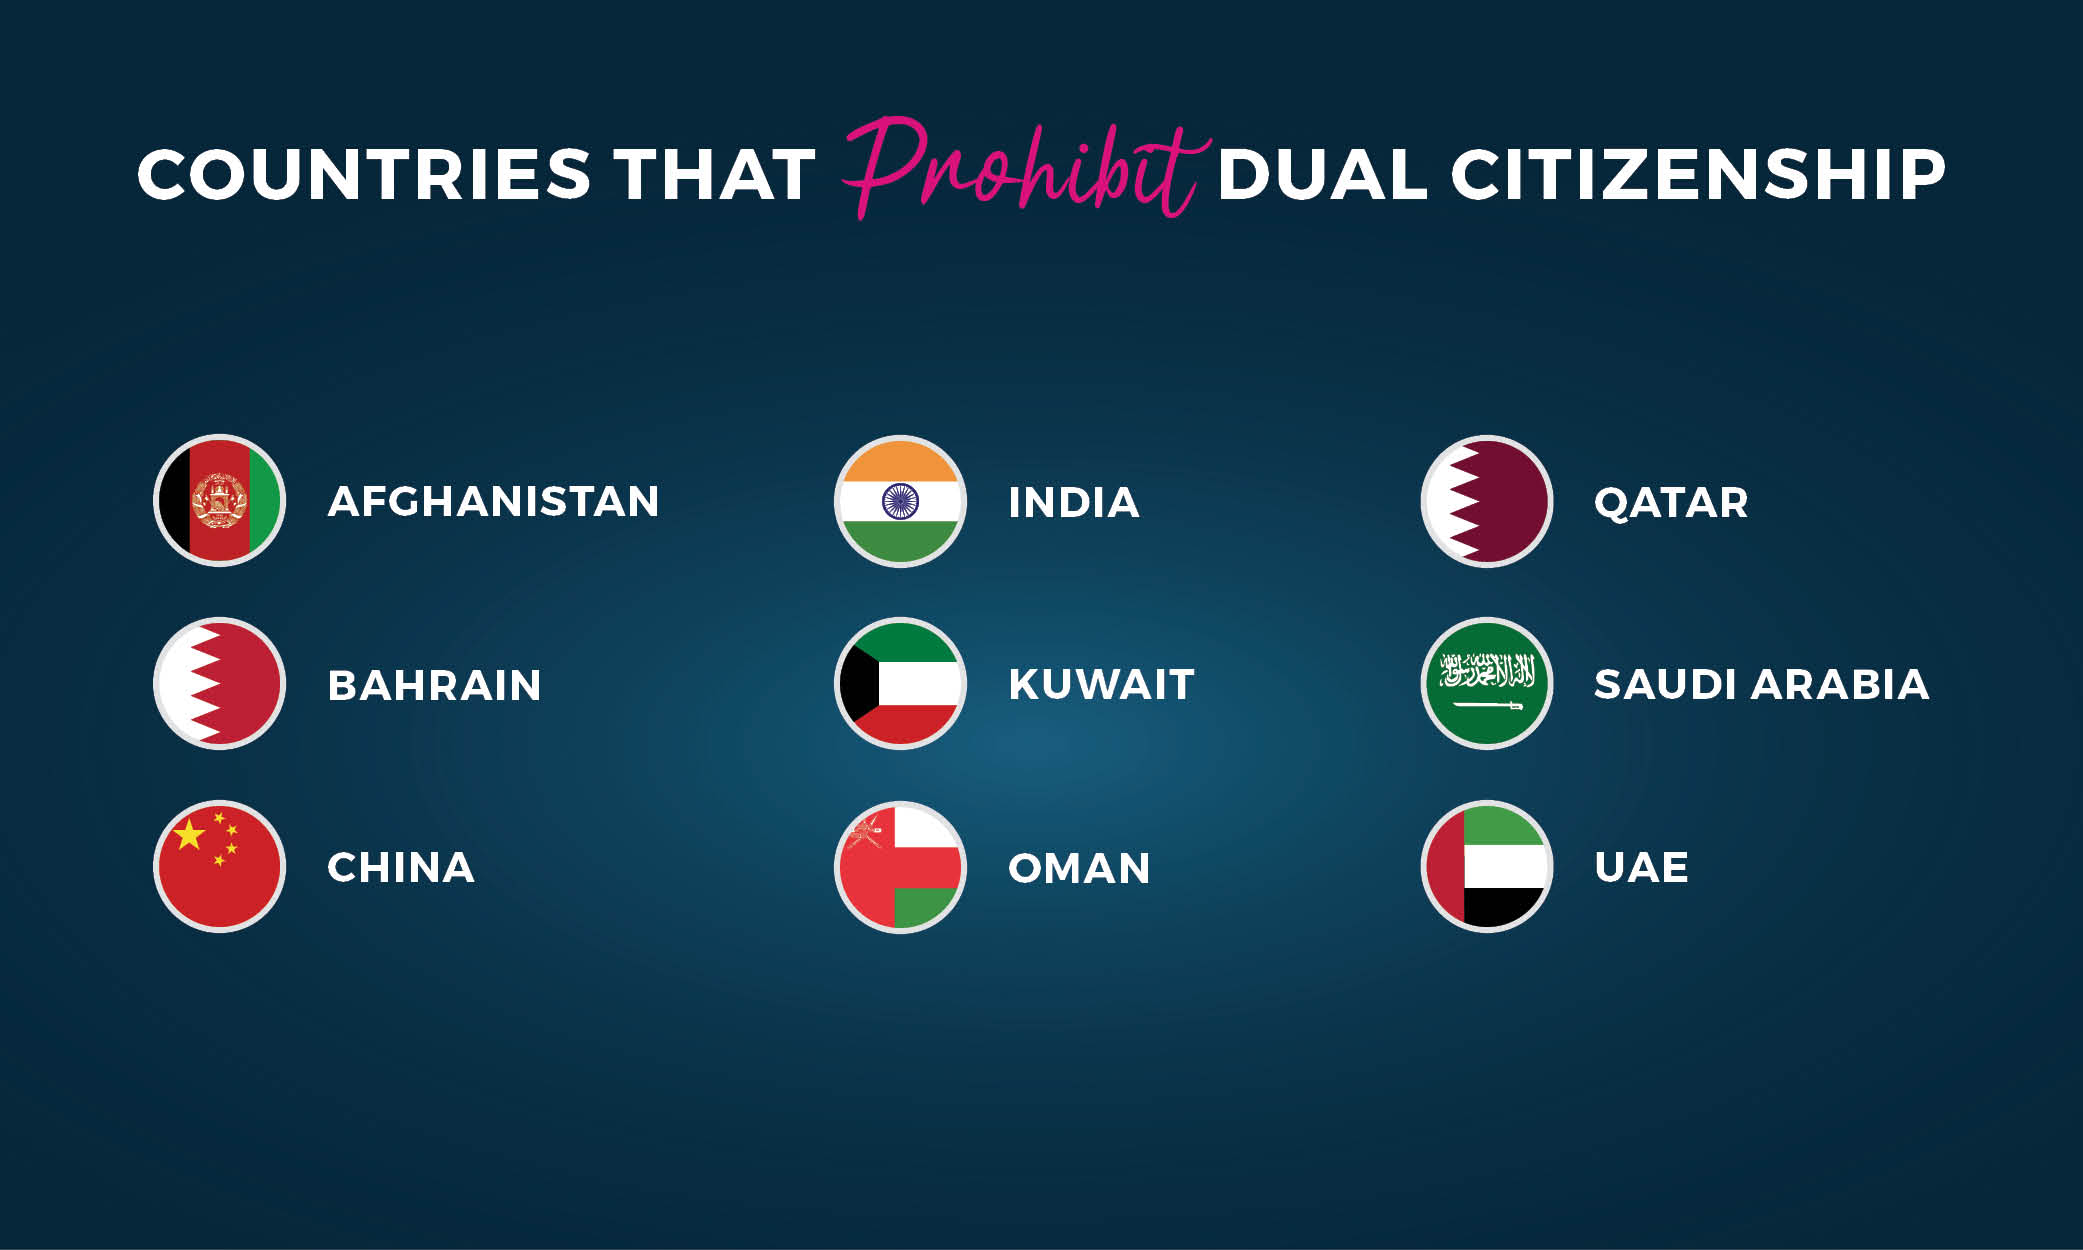 Find out countries that prohibit dual citizenship.